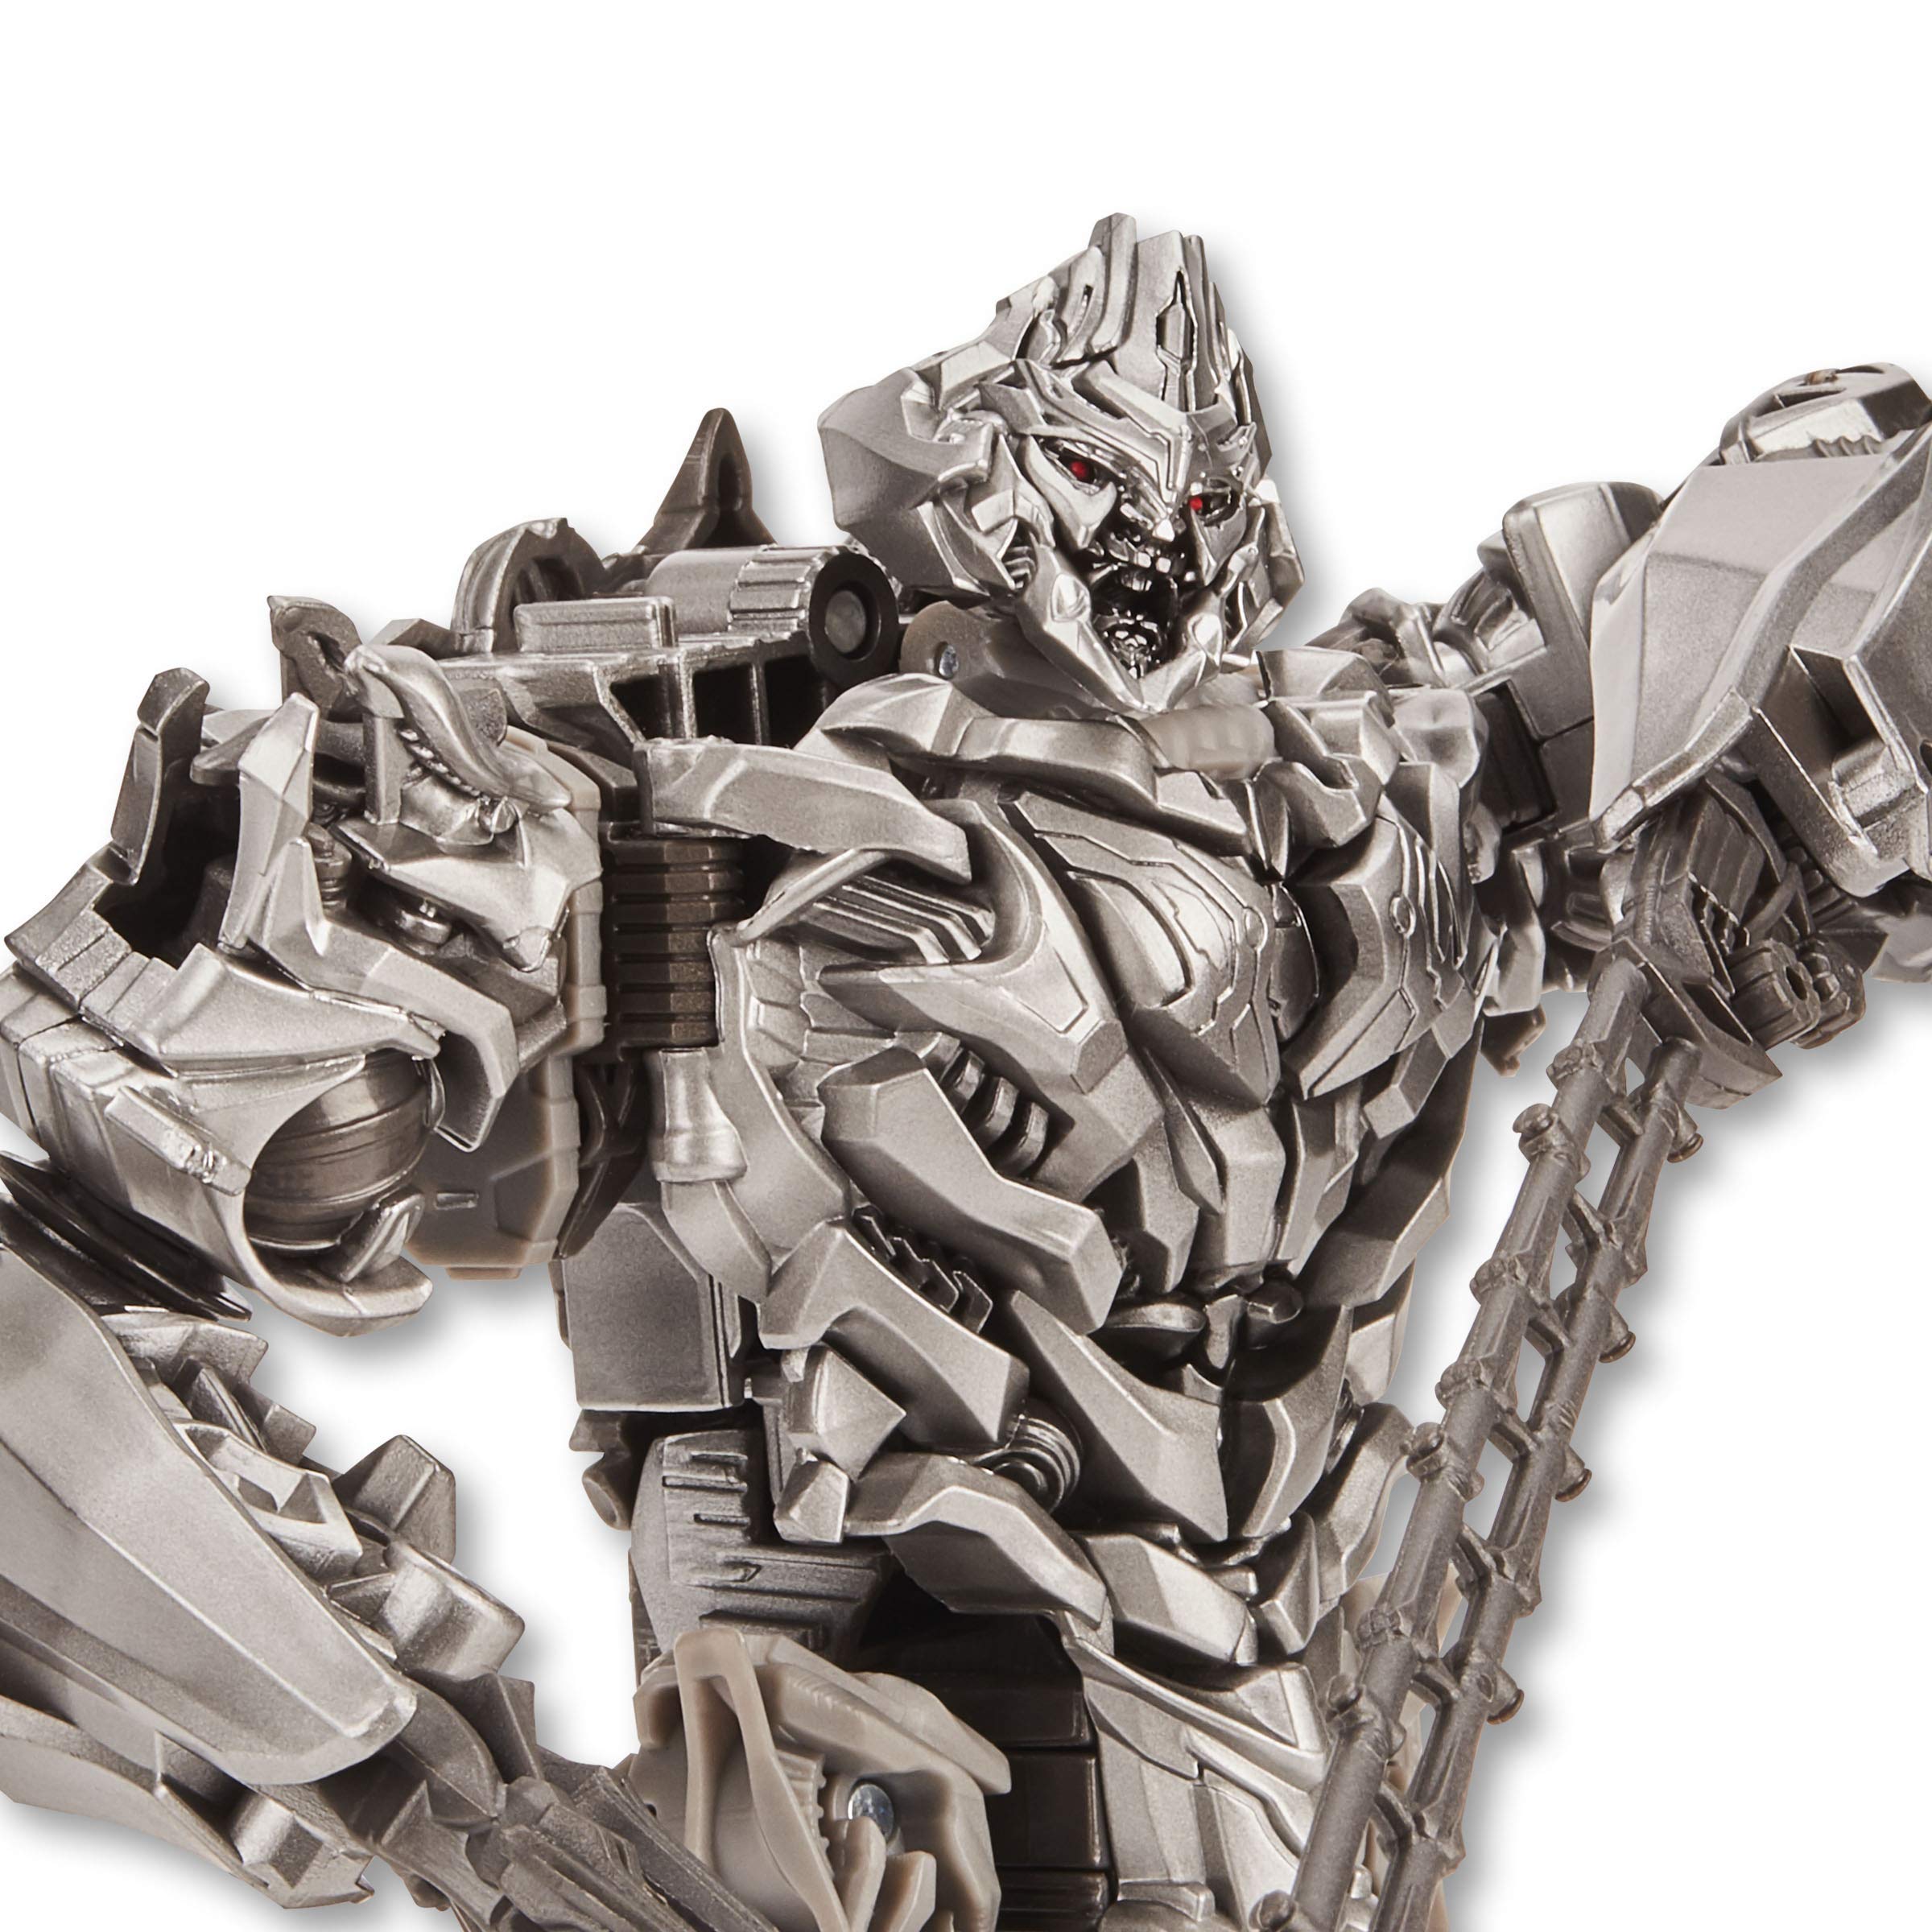 Transformers Toys Studio Series 54 Voyager Class Movie 1 Megatron Action Figure - Ages 8 & Up, 6.5